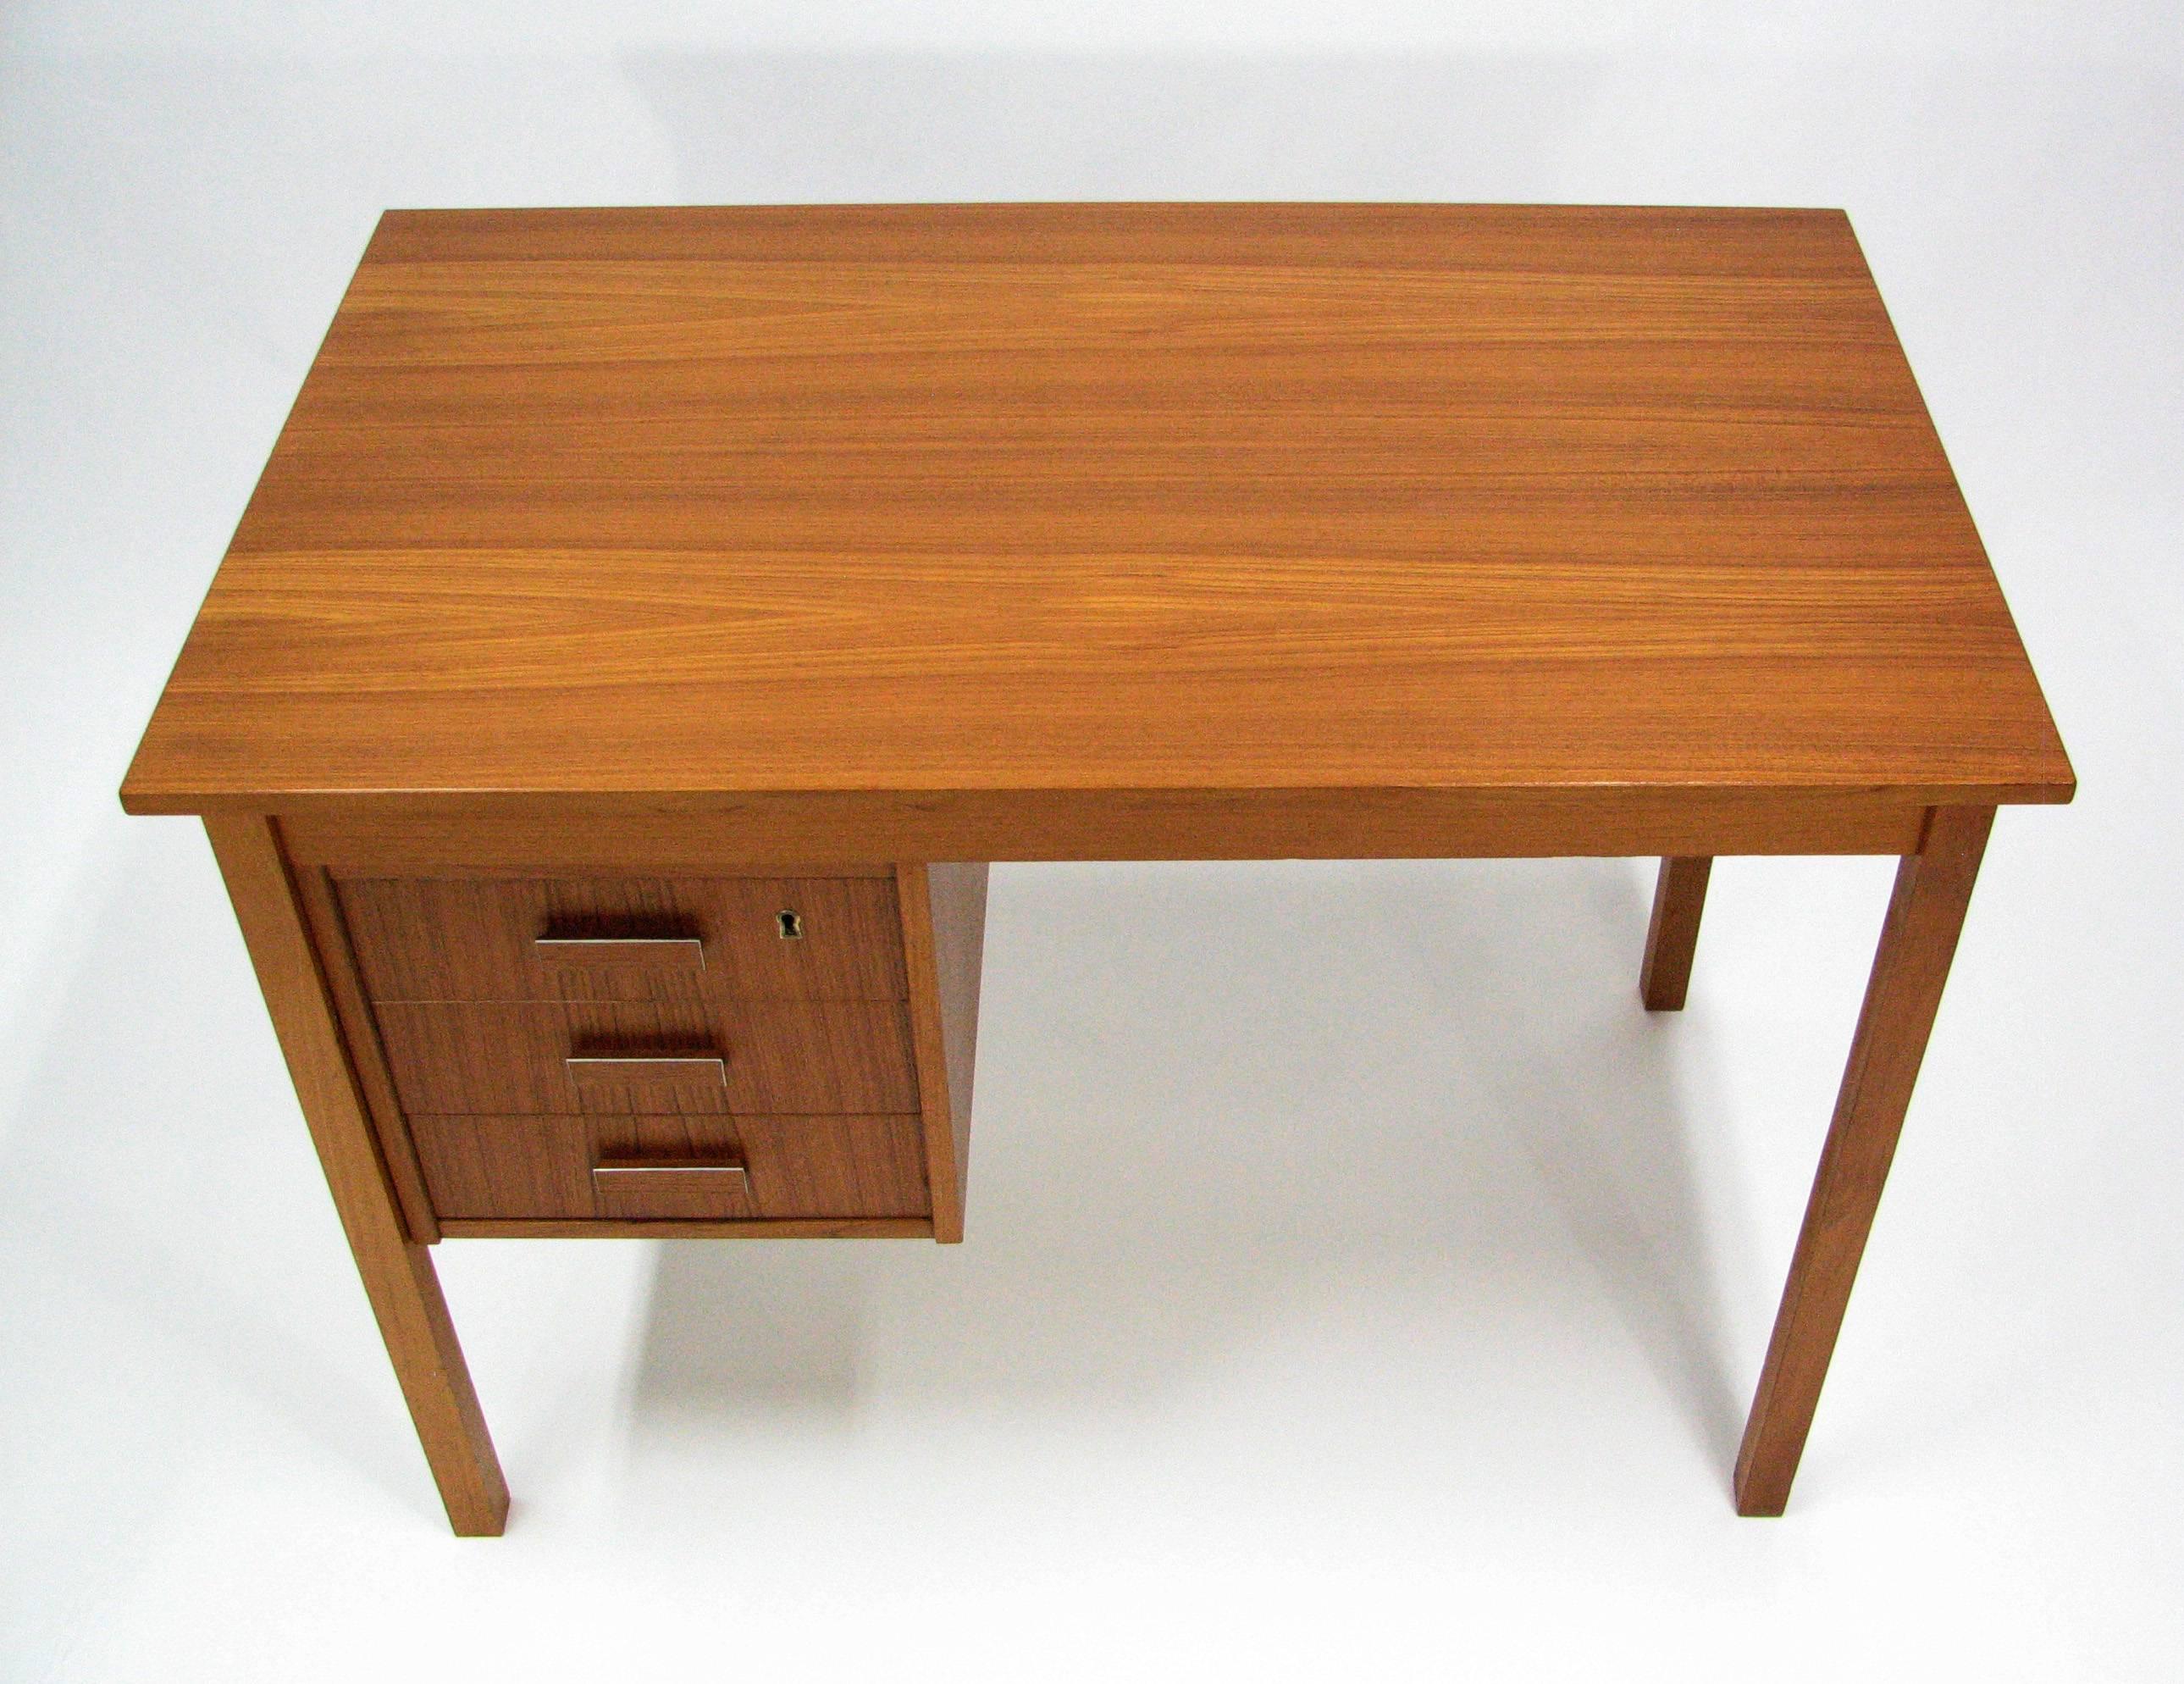 A strikingly handsome midcentury teak writing desk by Ejsing Møbelfabrik A/S. 

Three locking drawers with teak and aluminium pulls and the original key. The richly-grained back of the drawer cabinet is stunning, and makes this a desk that can be